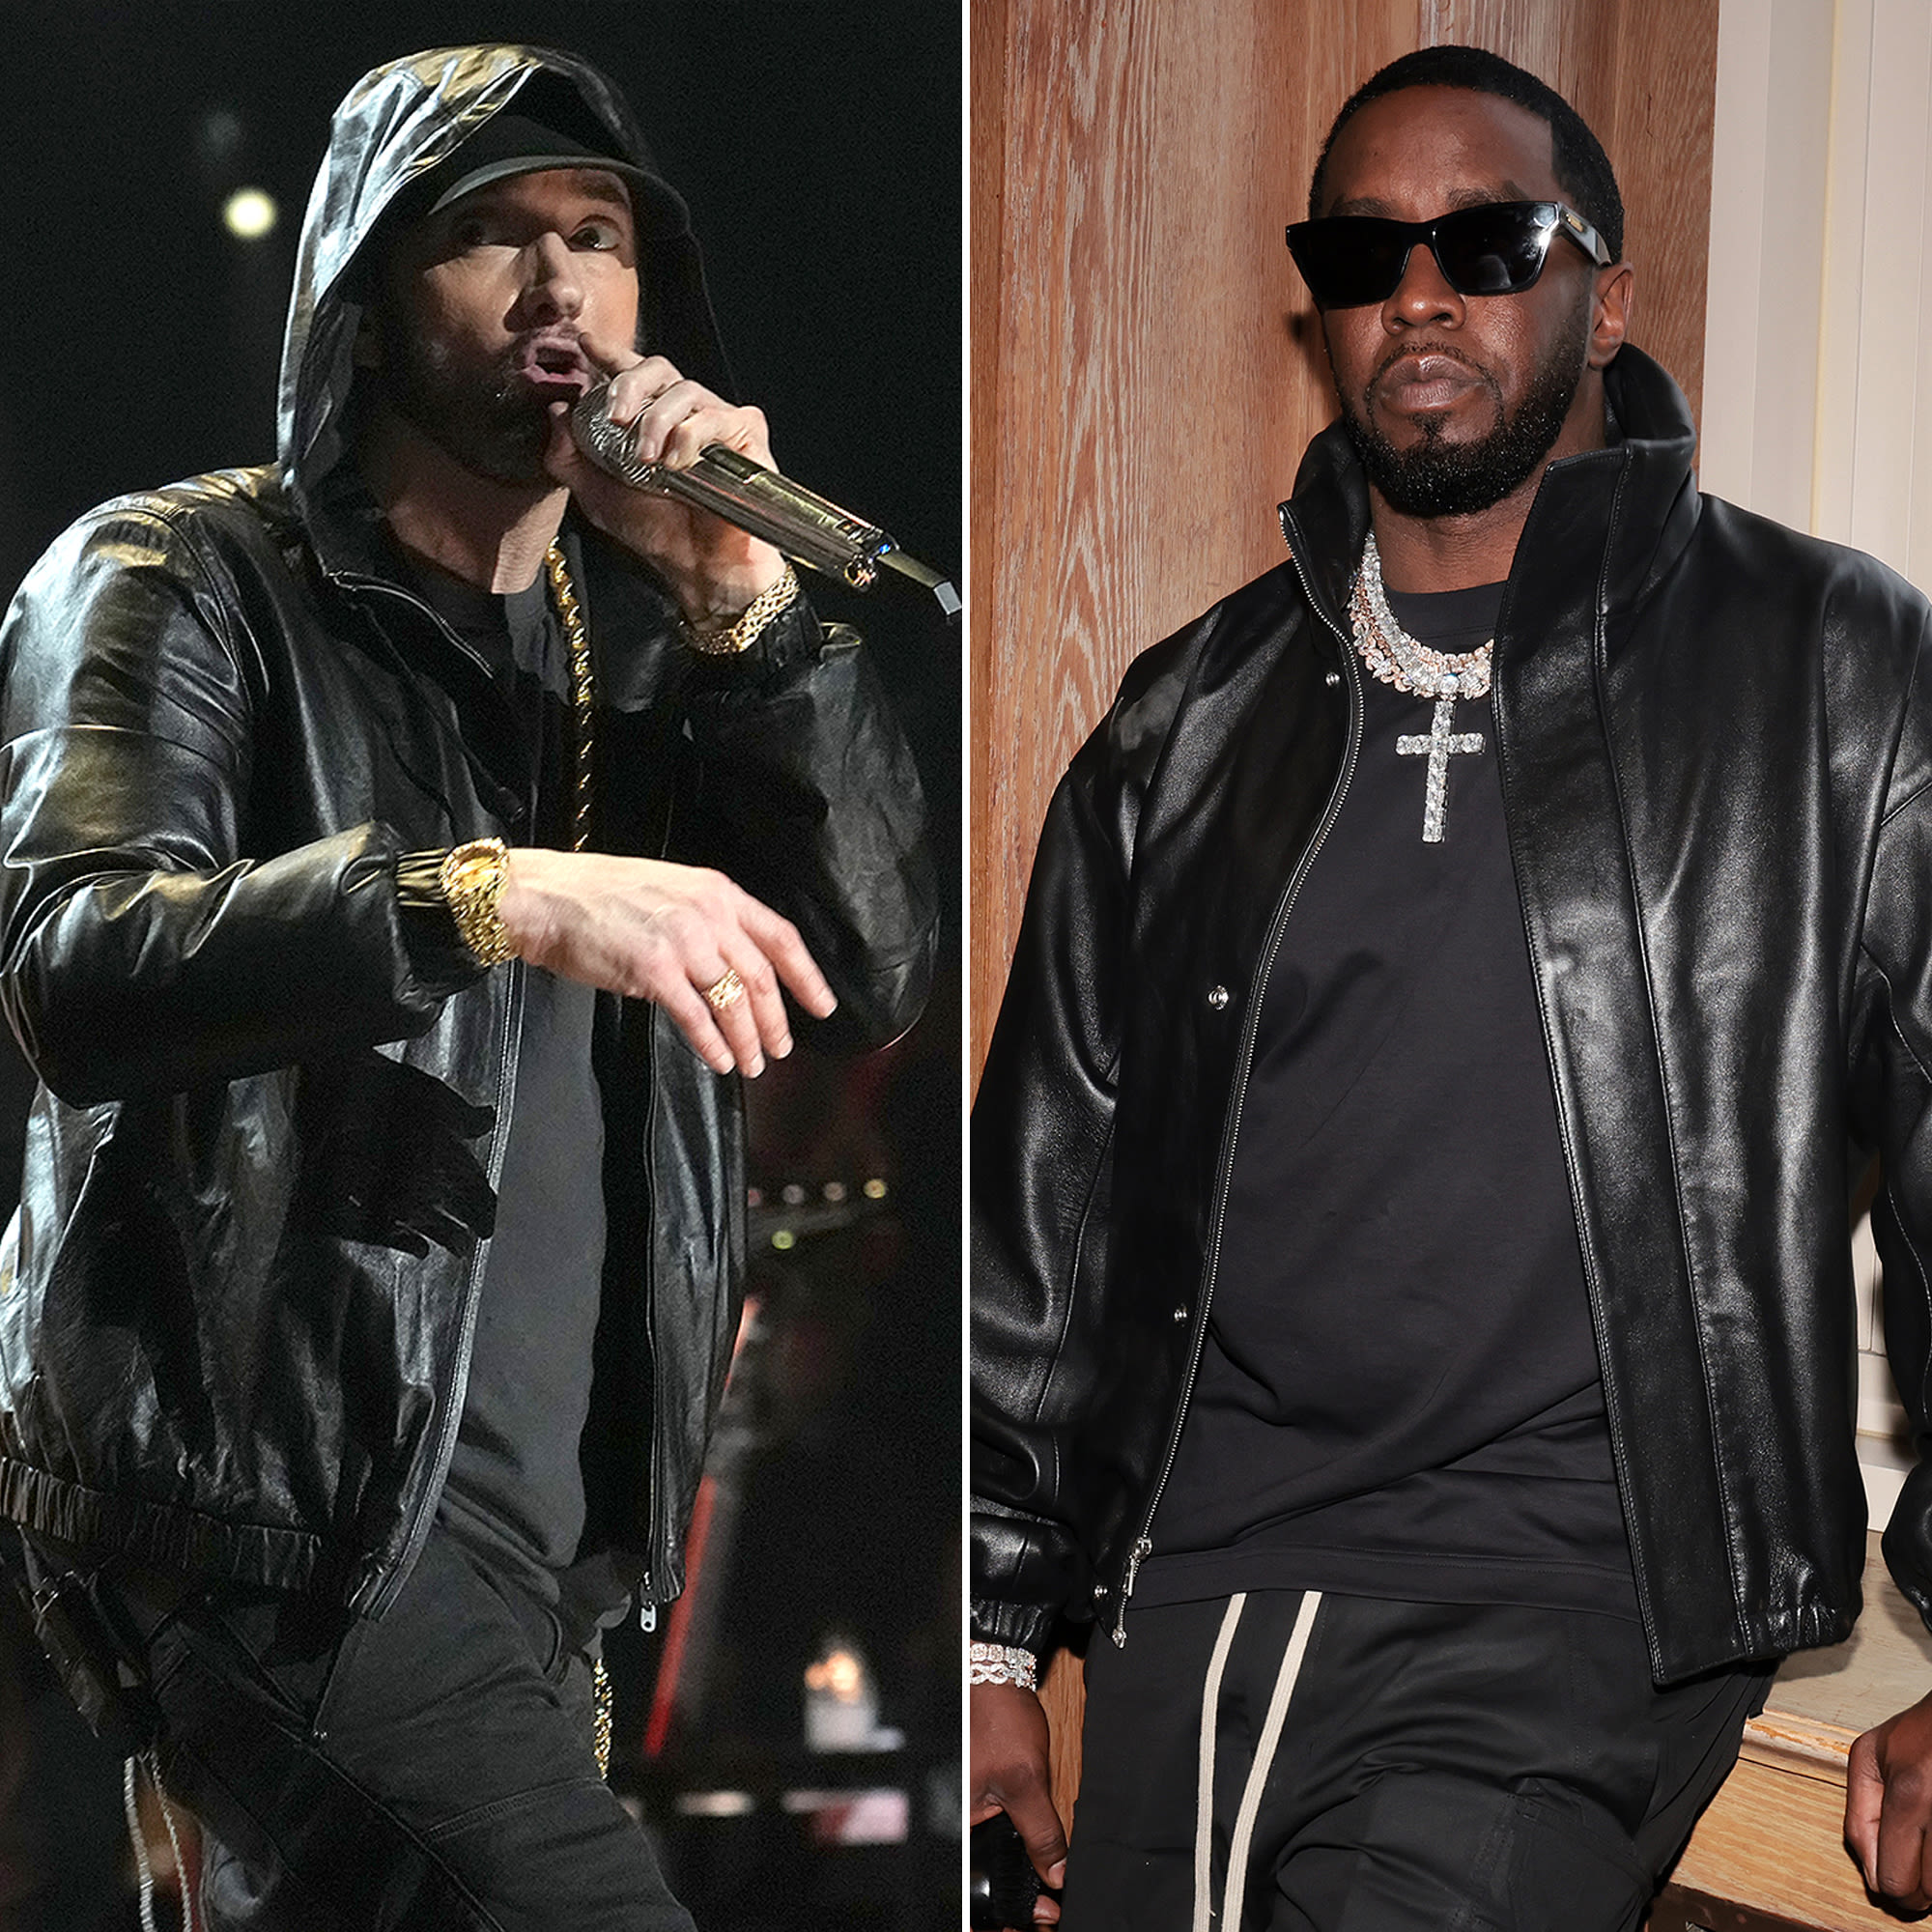 Eminem Calls Out Diddy’s Sexual Assault Allegations in 3 Songs